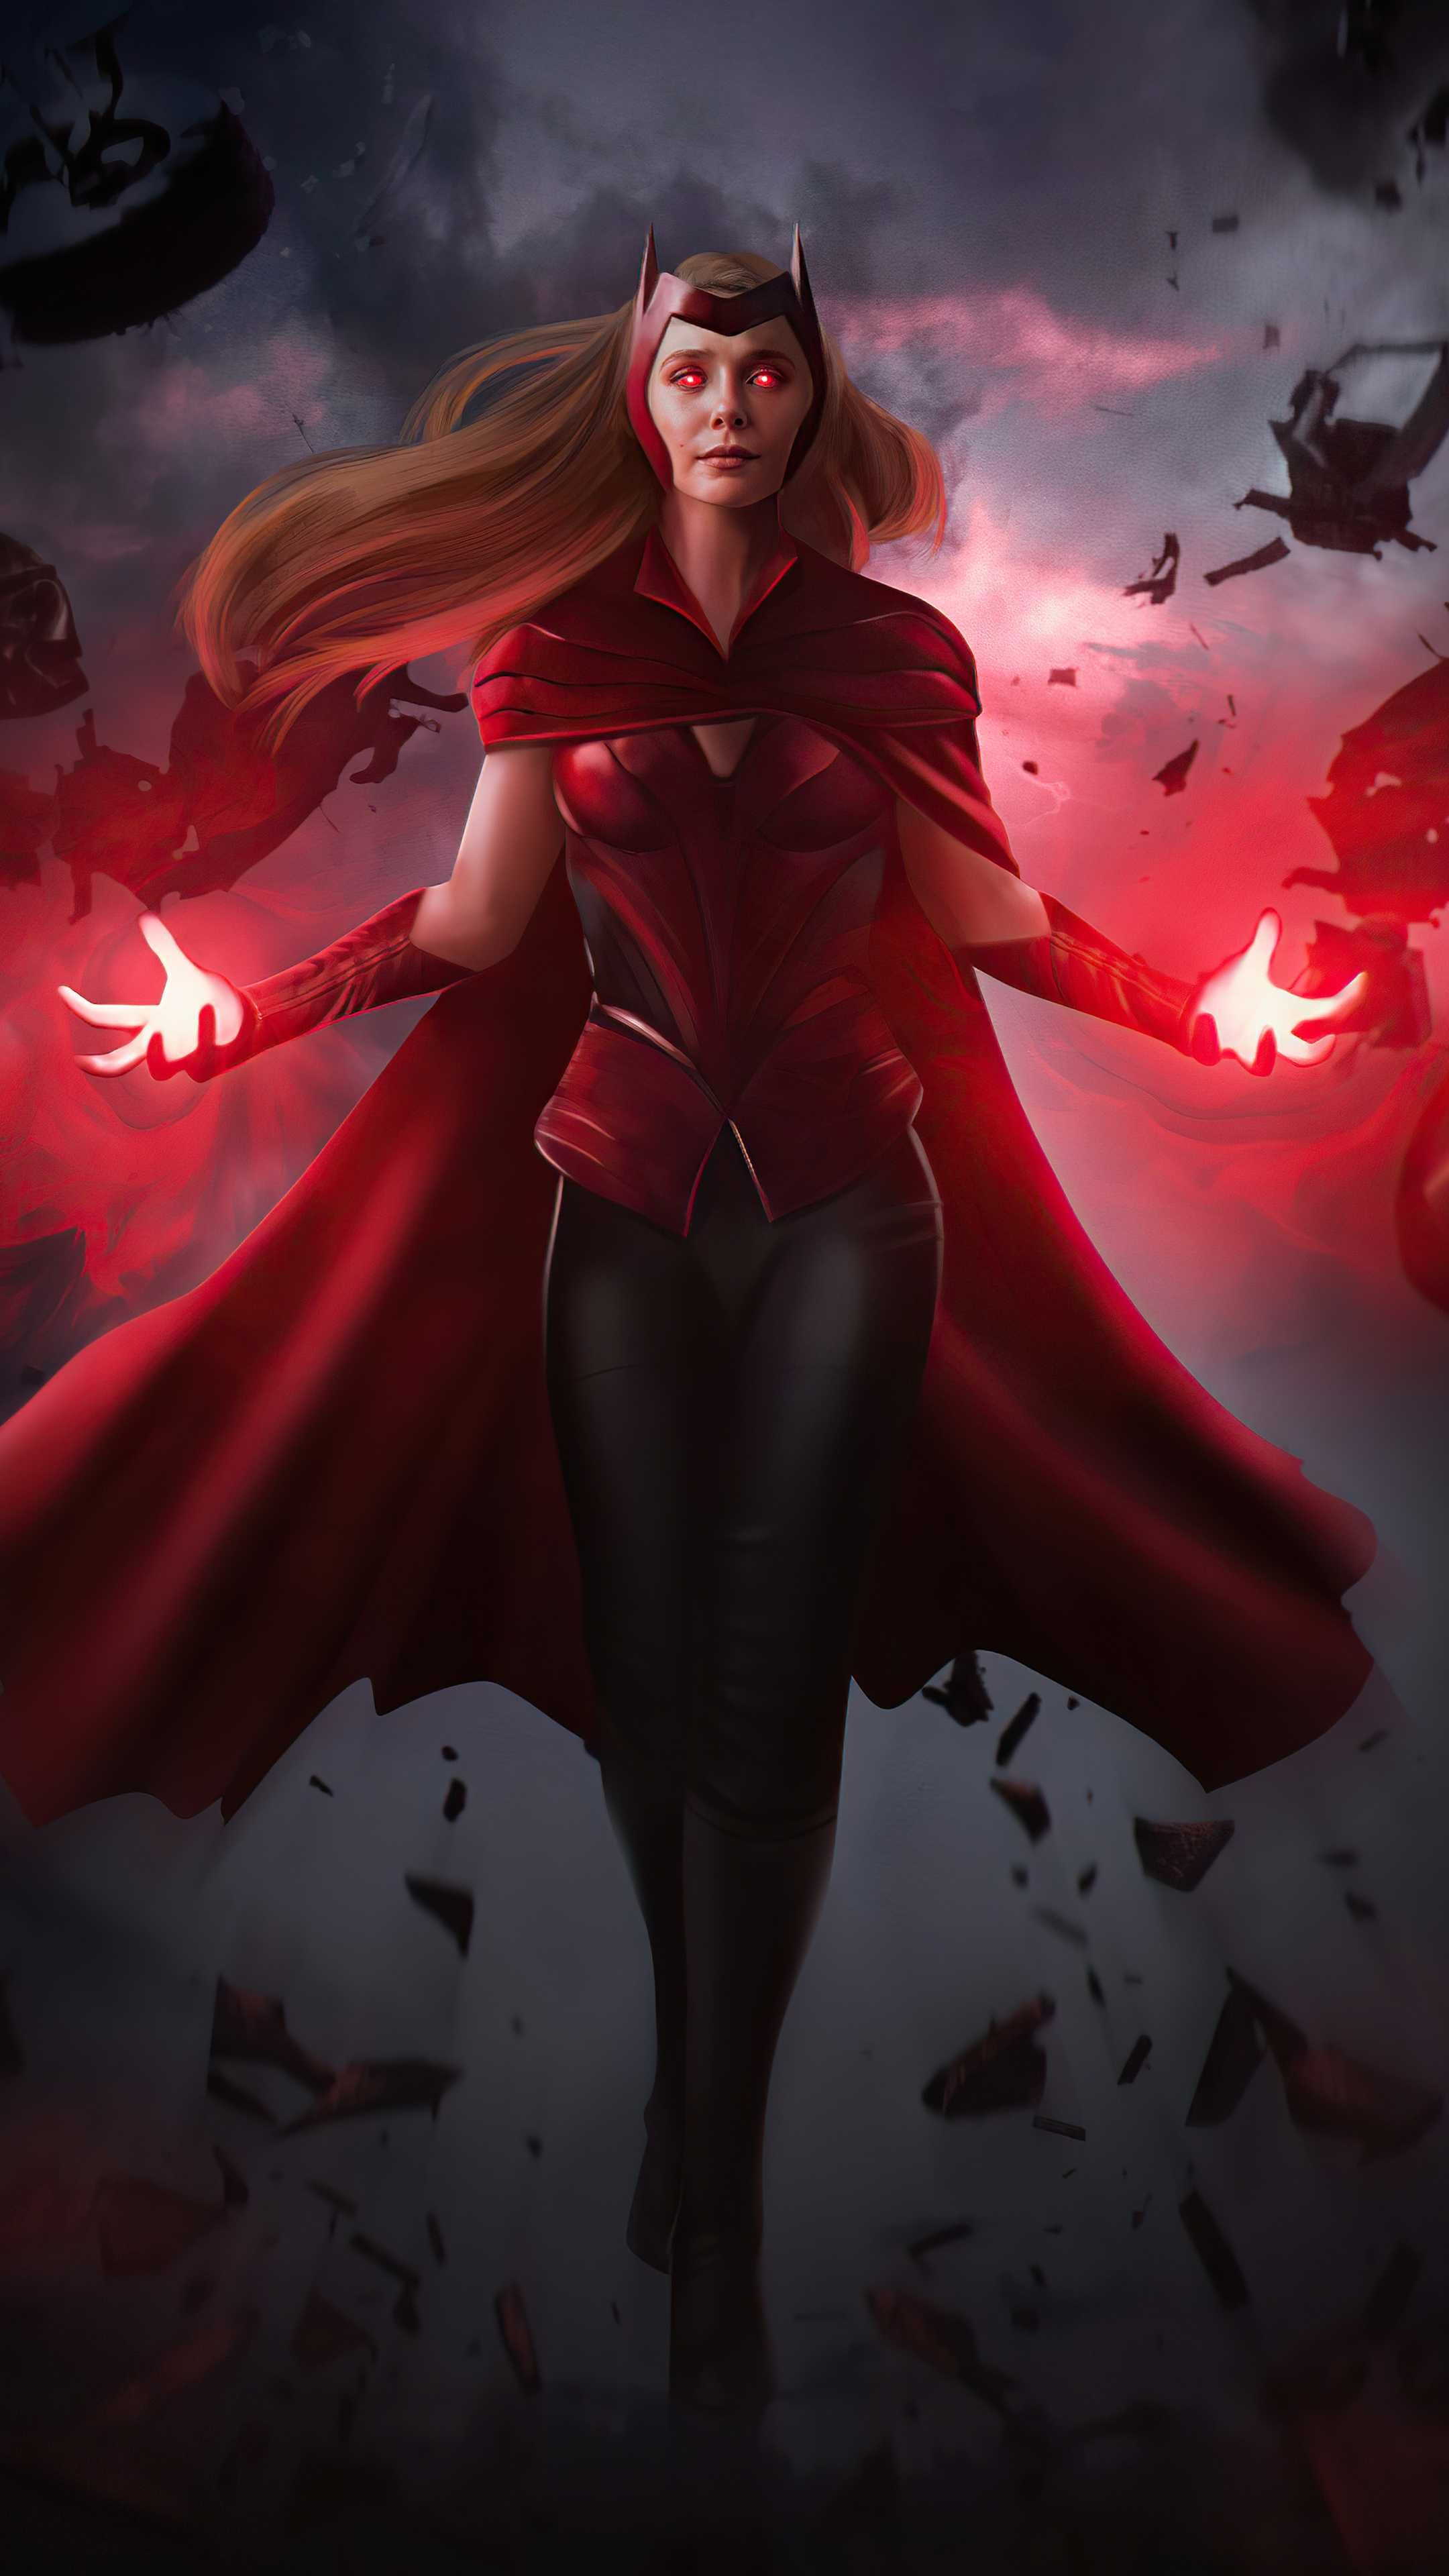 Scarlet Witch Wallpaper Browse Scarlet Witch Wallpaper with collections of Android, Avengers, Desktop, iPhone, Minimalist. Scarlet witch, Witch wallpaper, Scarlet